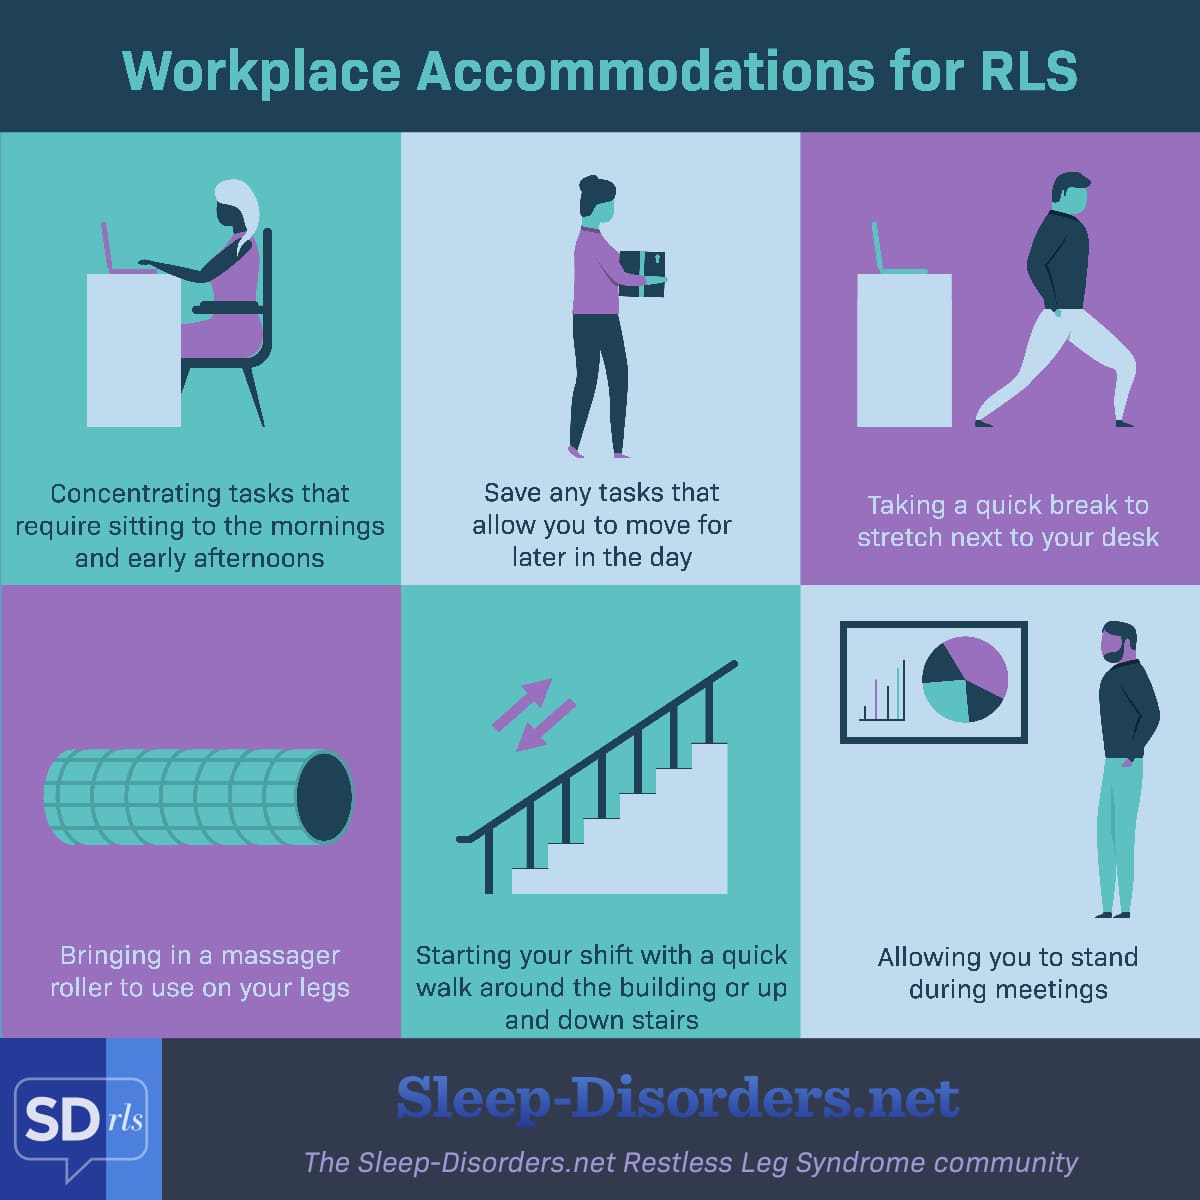 Accommodations for patients dealing with RLS that can be made in a workplace setting